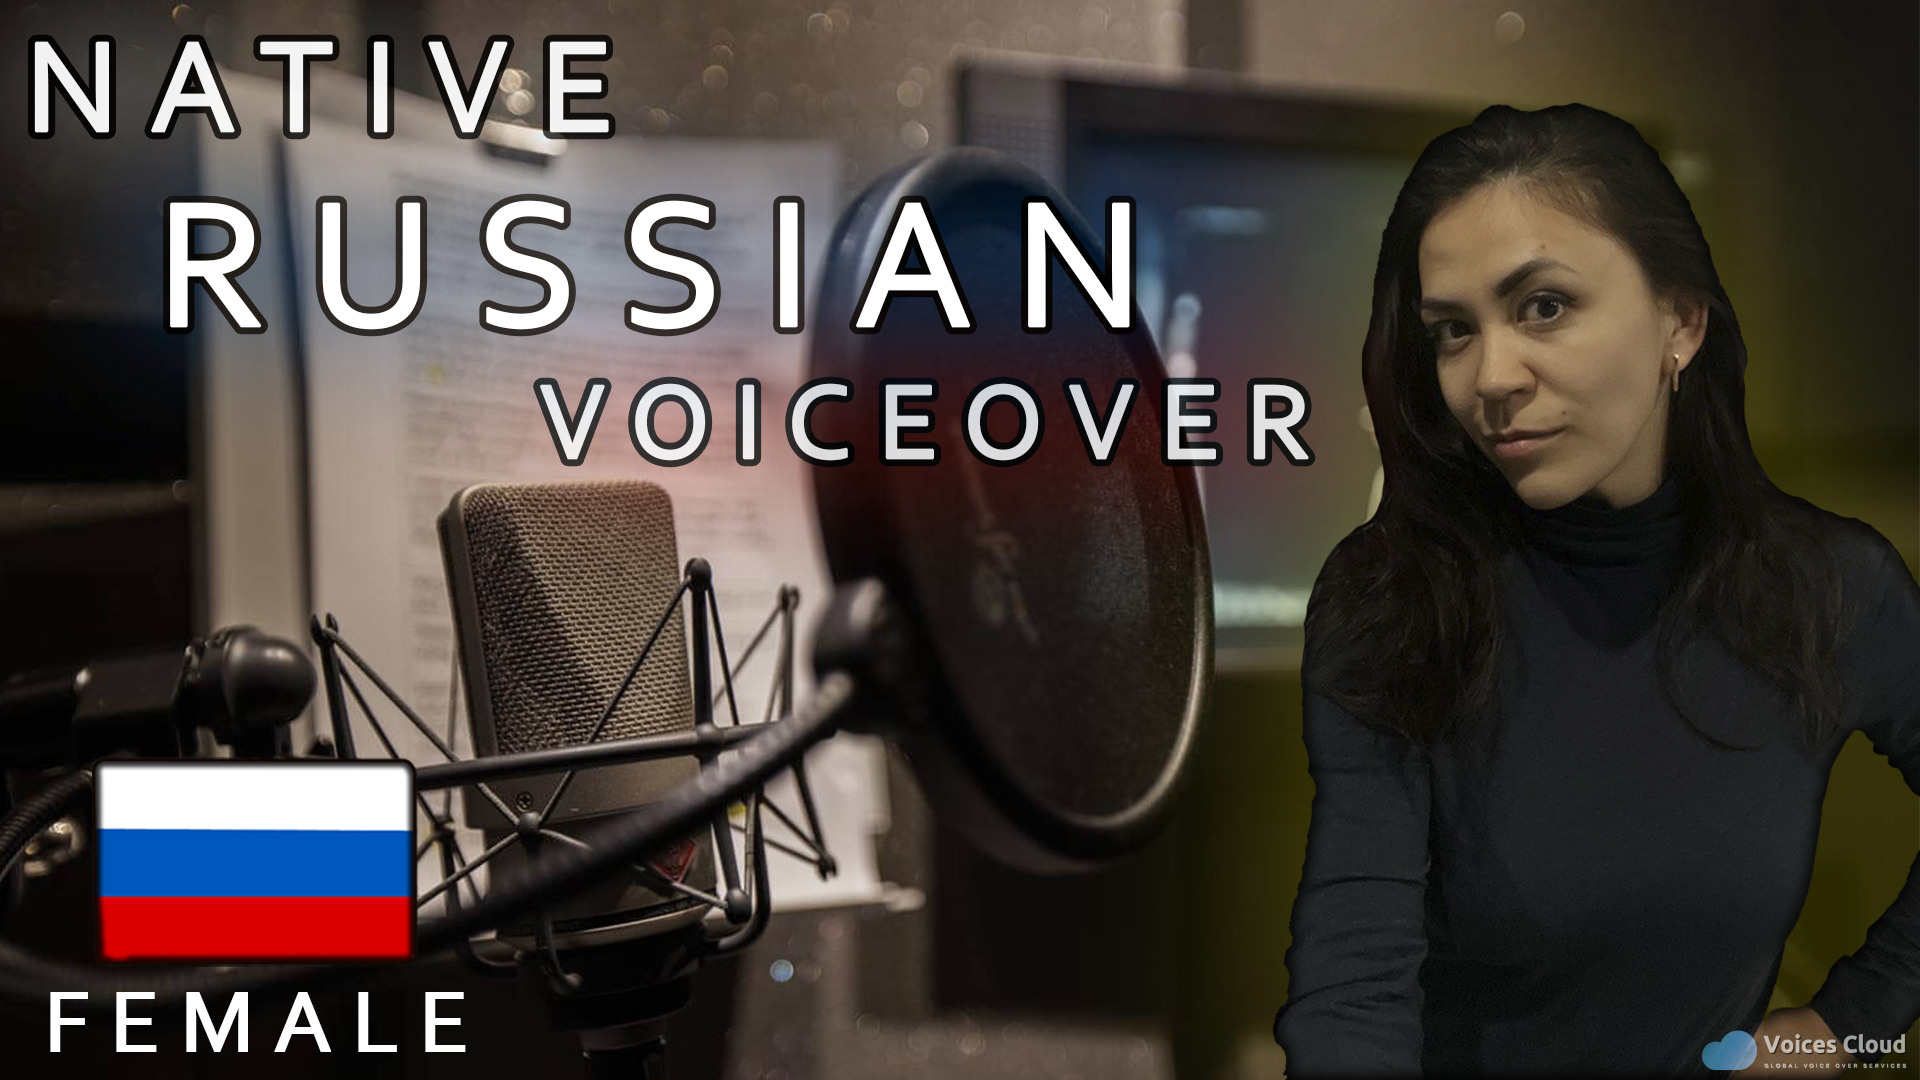 67138Native Male Russian Voiceover